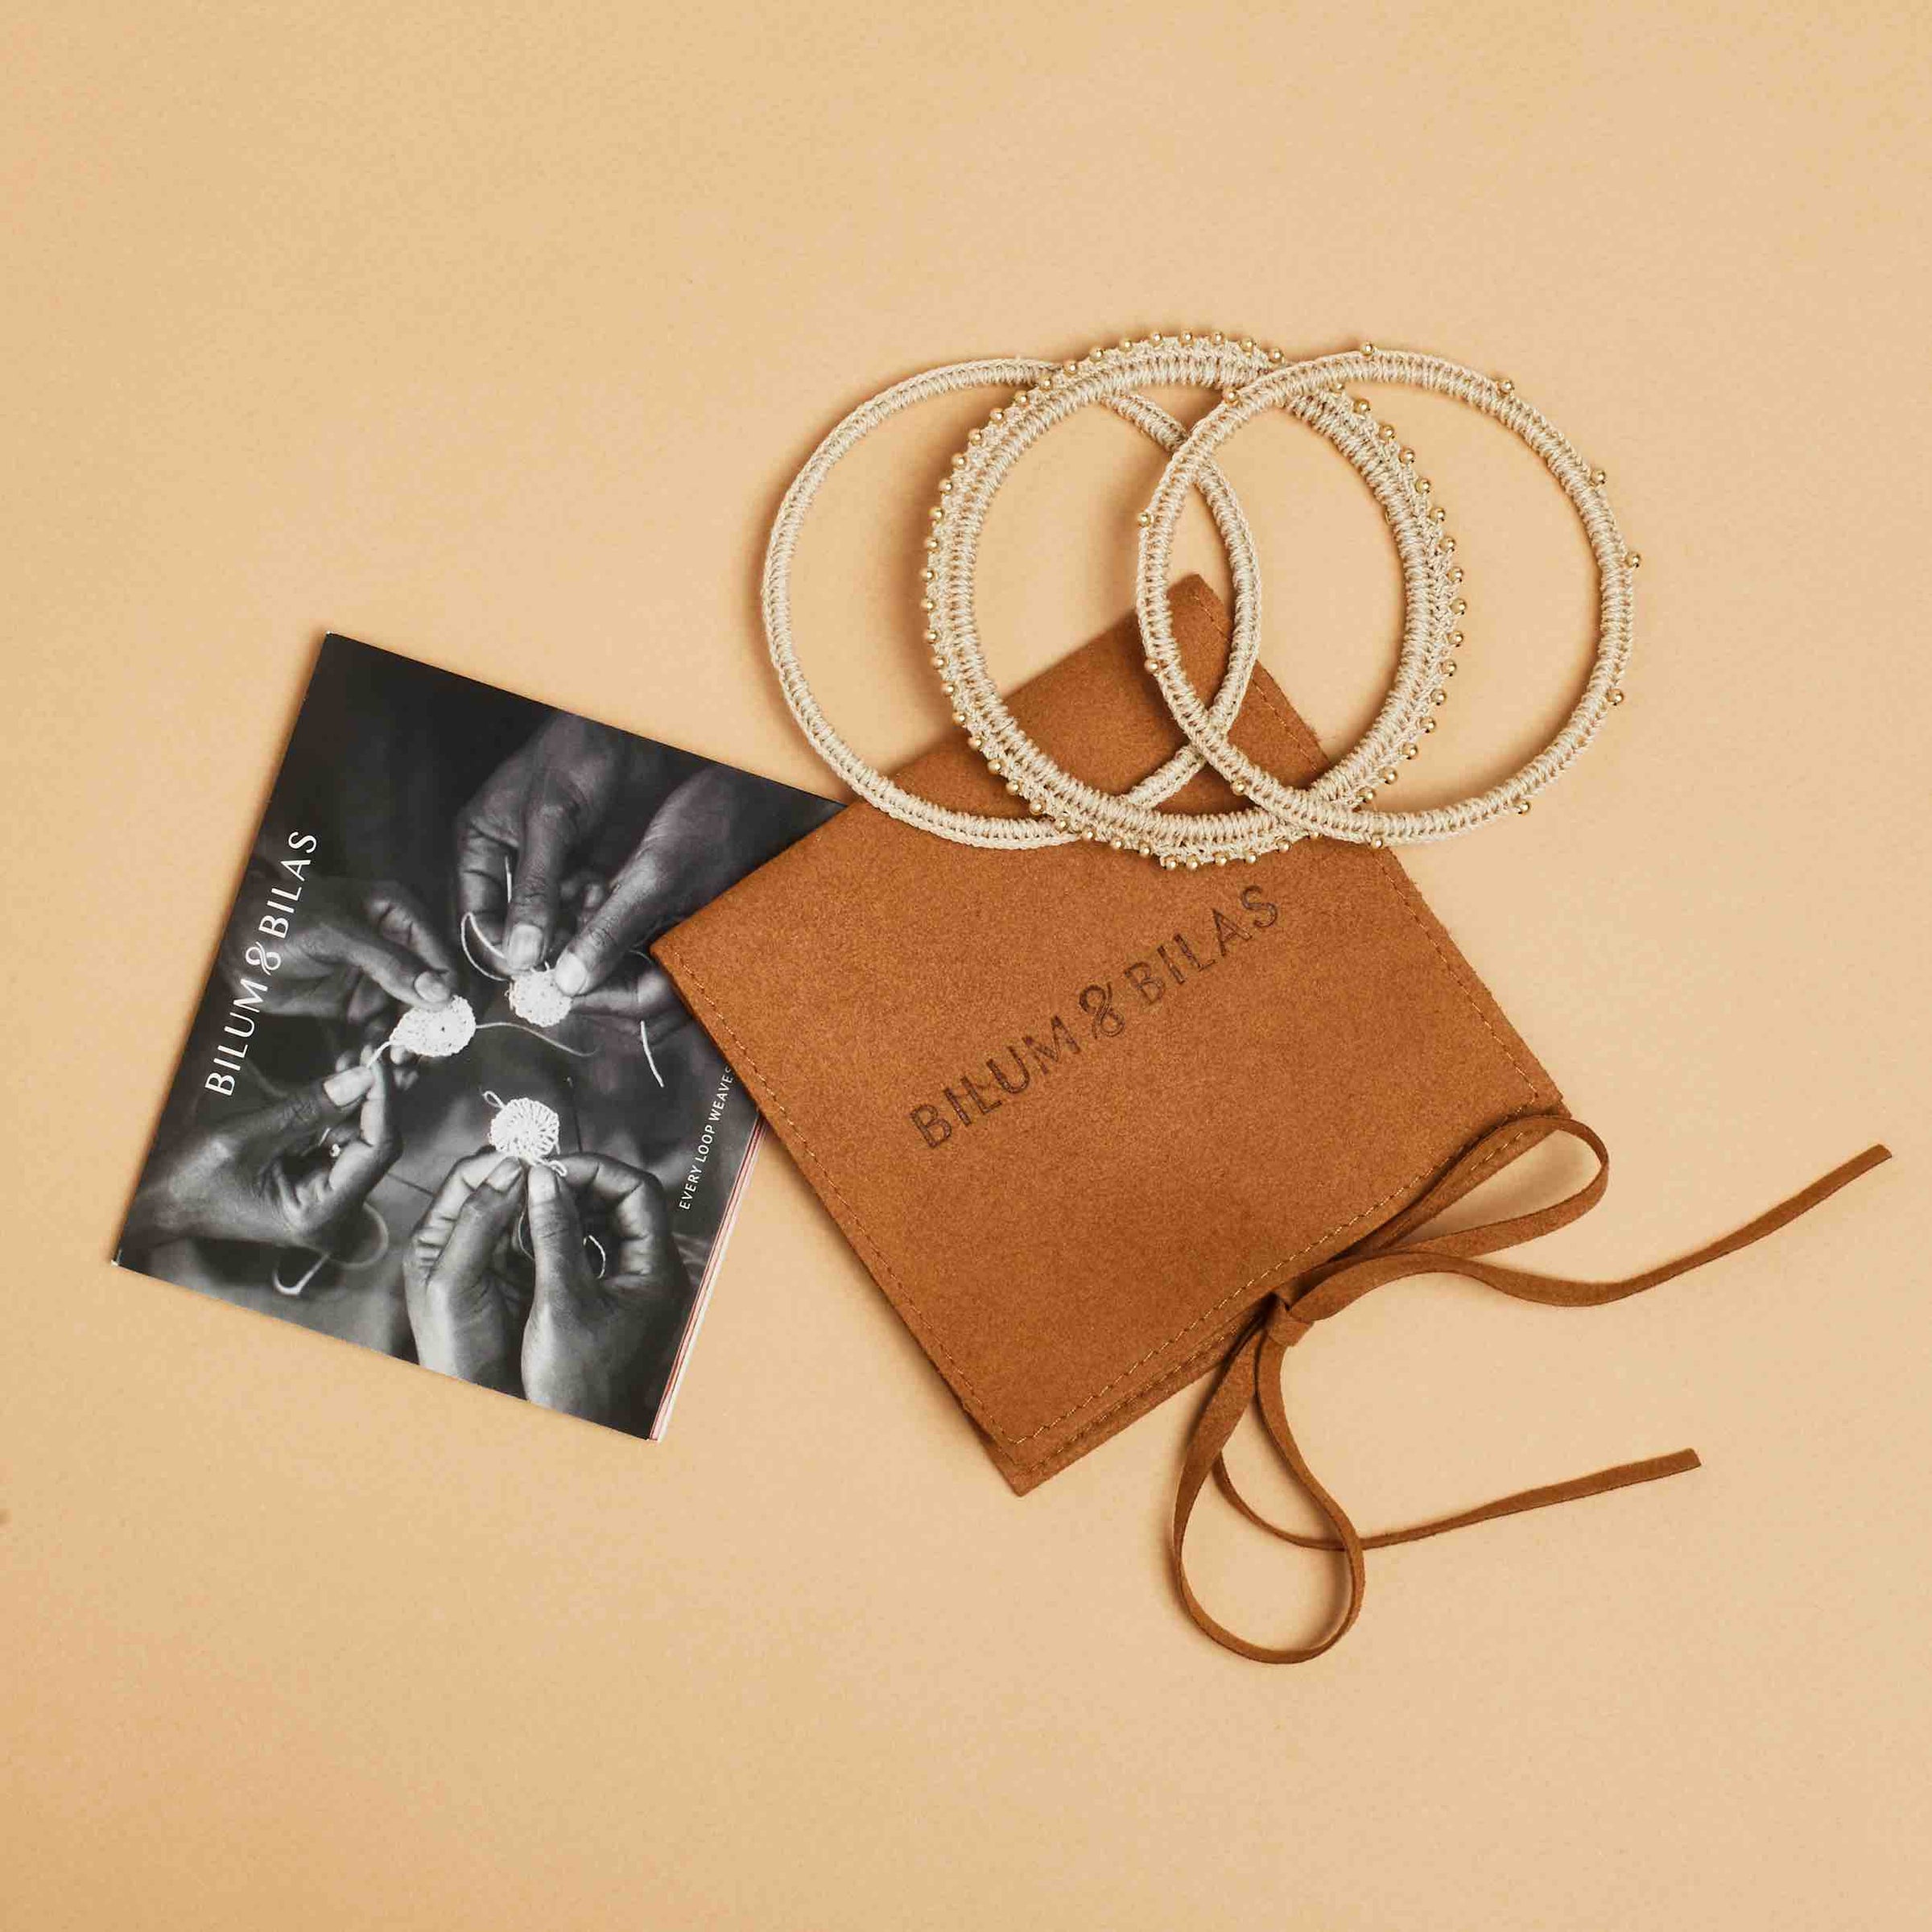 Bilum and Bilas jewellery packaging with handwoven bangle set with gold beading